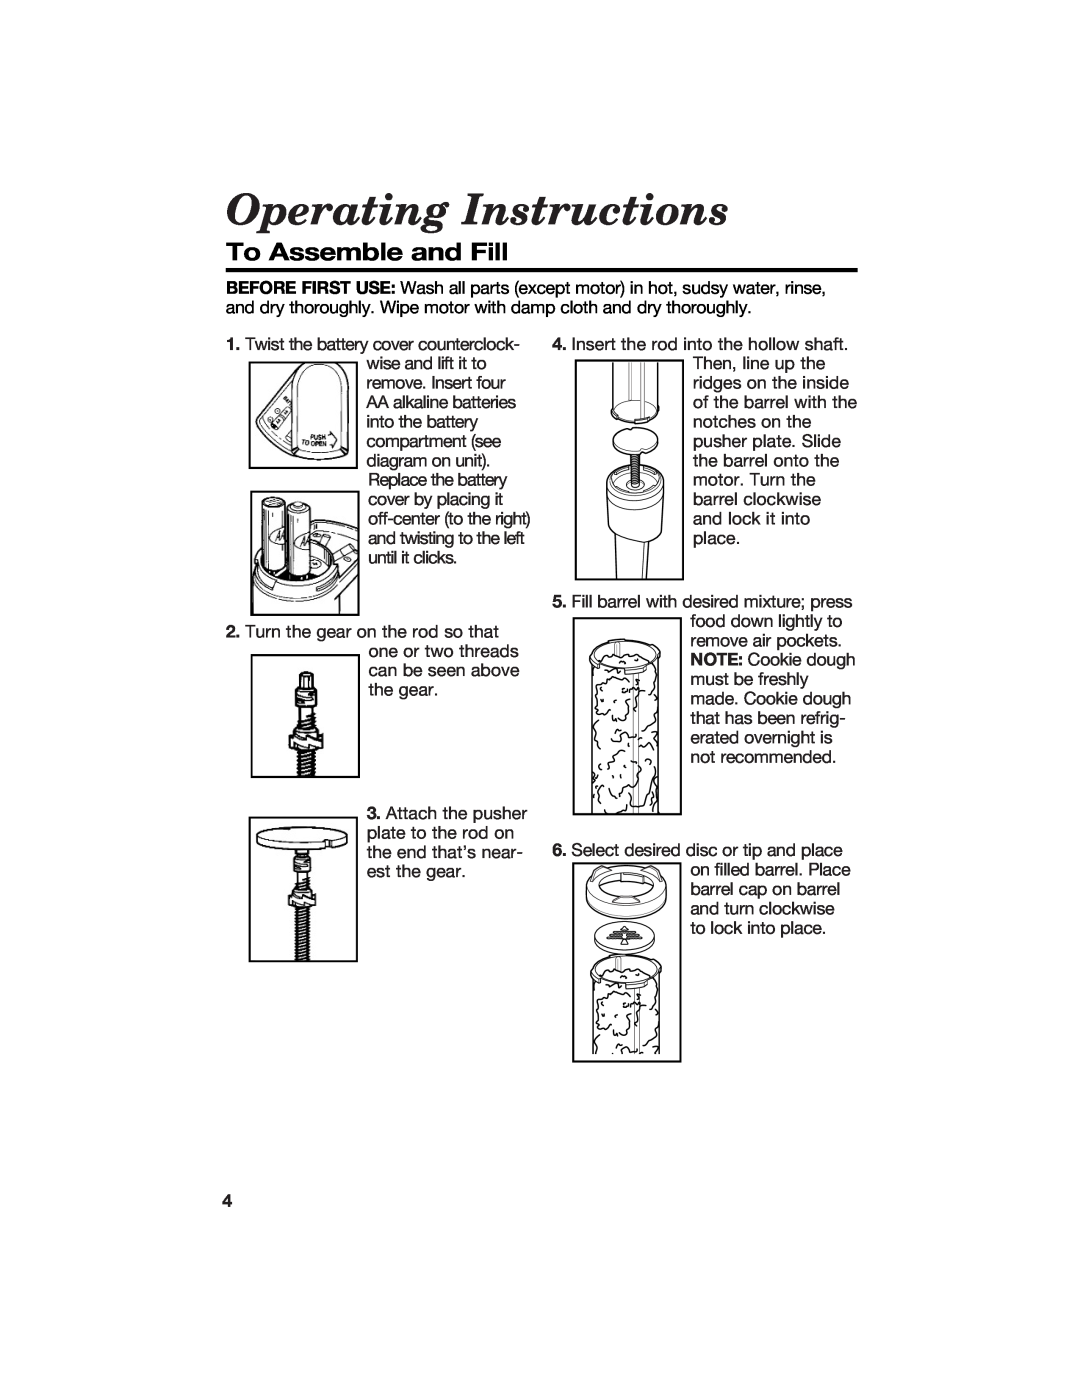 Hamilton Beach Cookie Press and Cake & Food Decorator manual Operating Instructions, To Assemble and Fill 